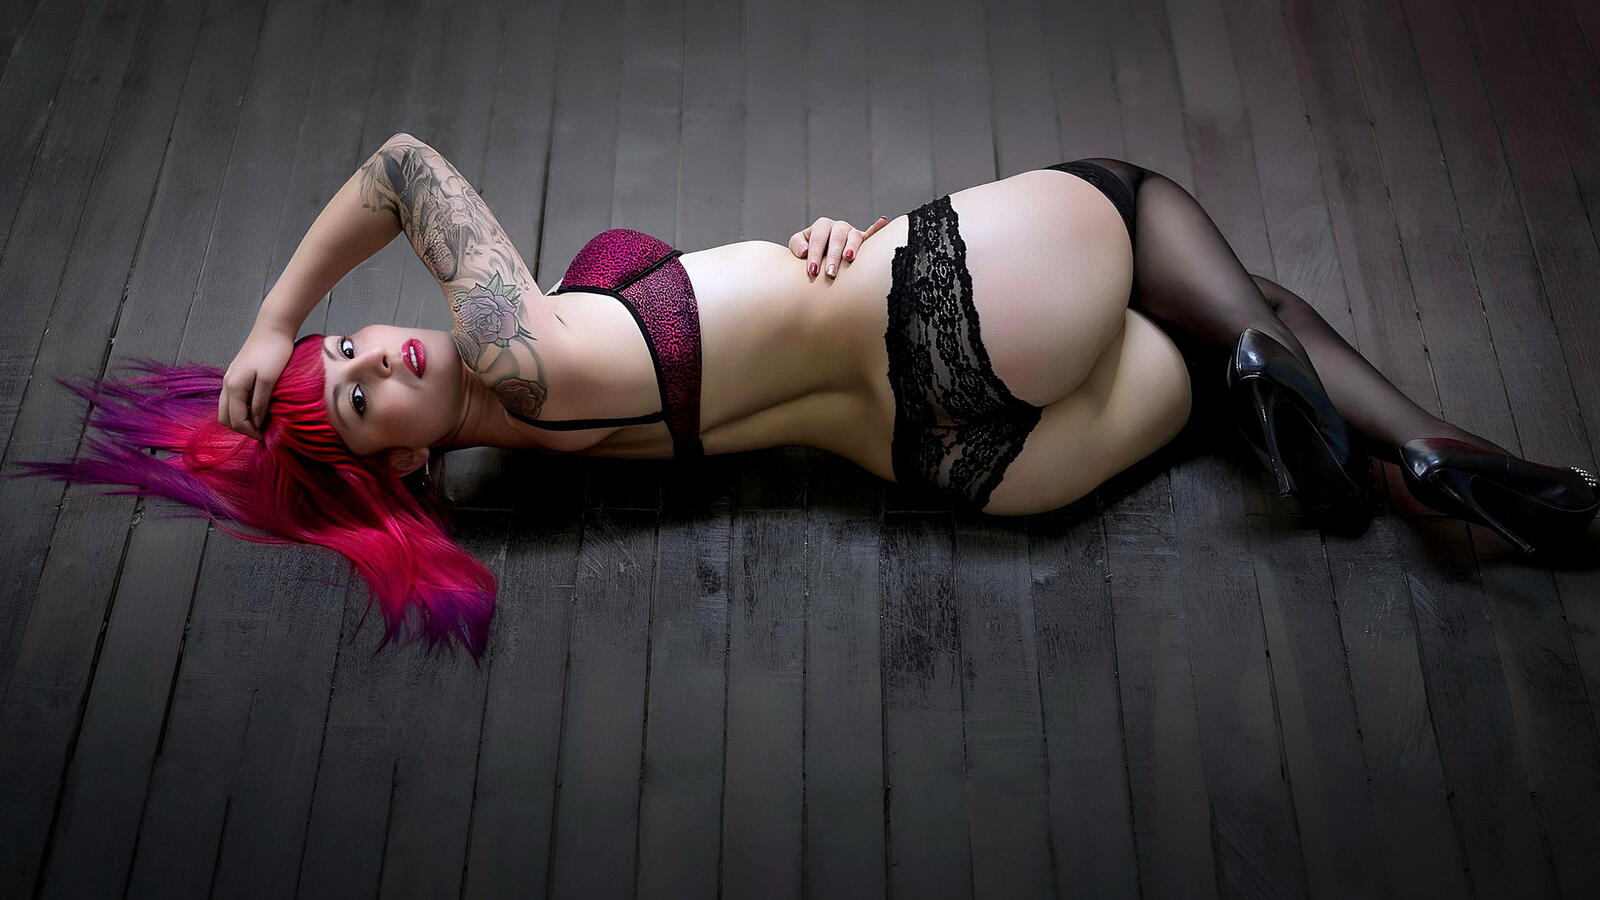 Free photo A girl with red hair and underwear lies on the floor